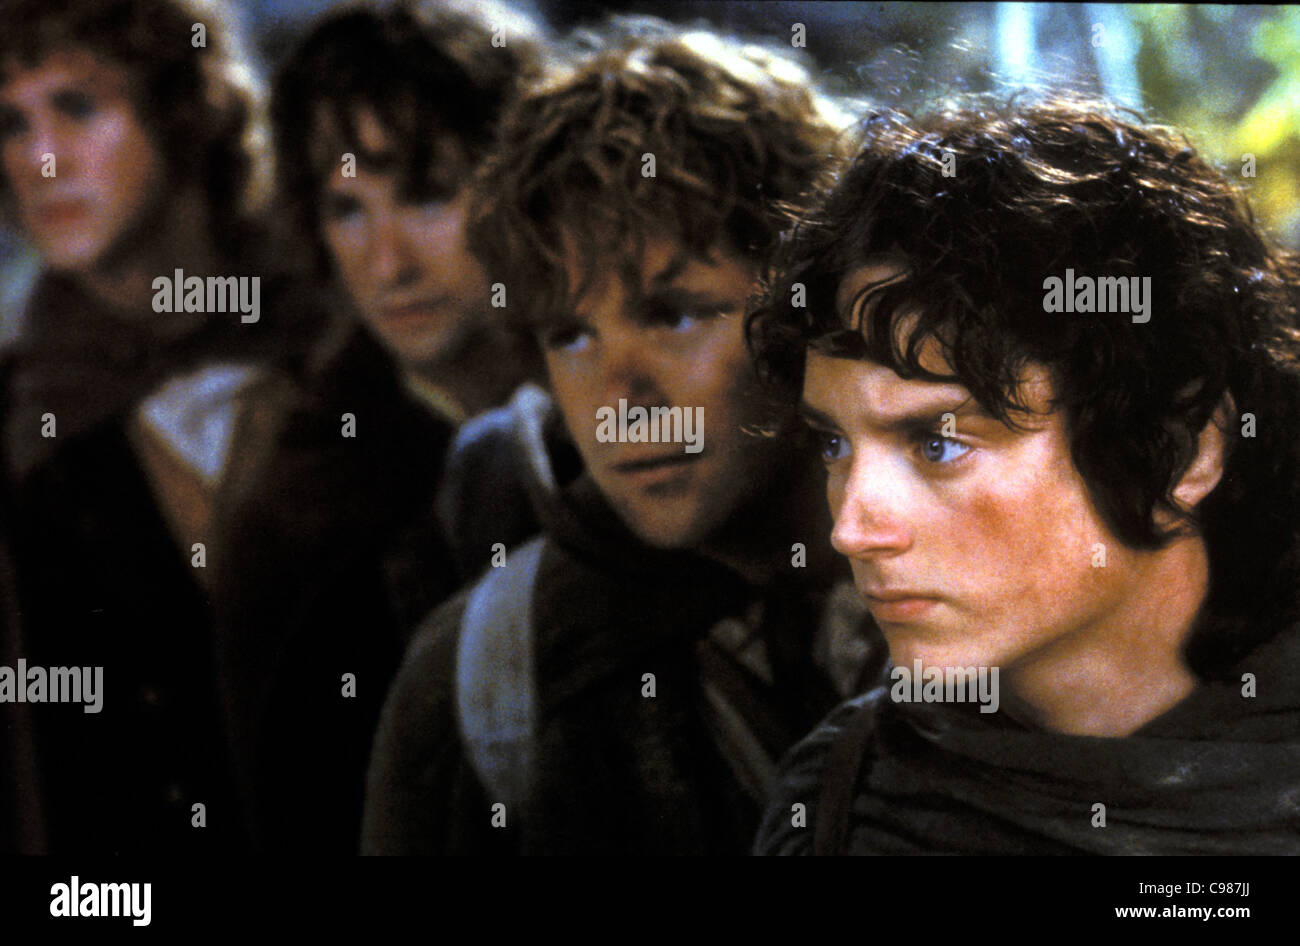 The Lord of the Rings: The Fellowship of the Ring  Year: 2001 USA /  New Zealand Director: Peter Jackson Elijah Wood, Sean Astin, Billy Boyd, Dominic Monaghan Stock Photo